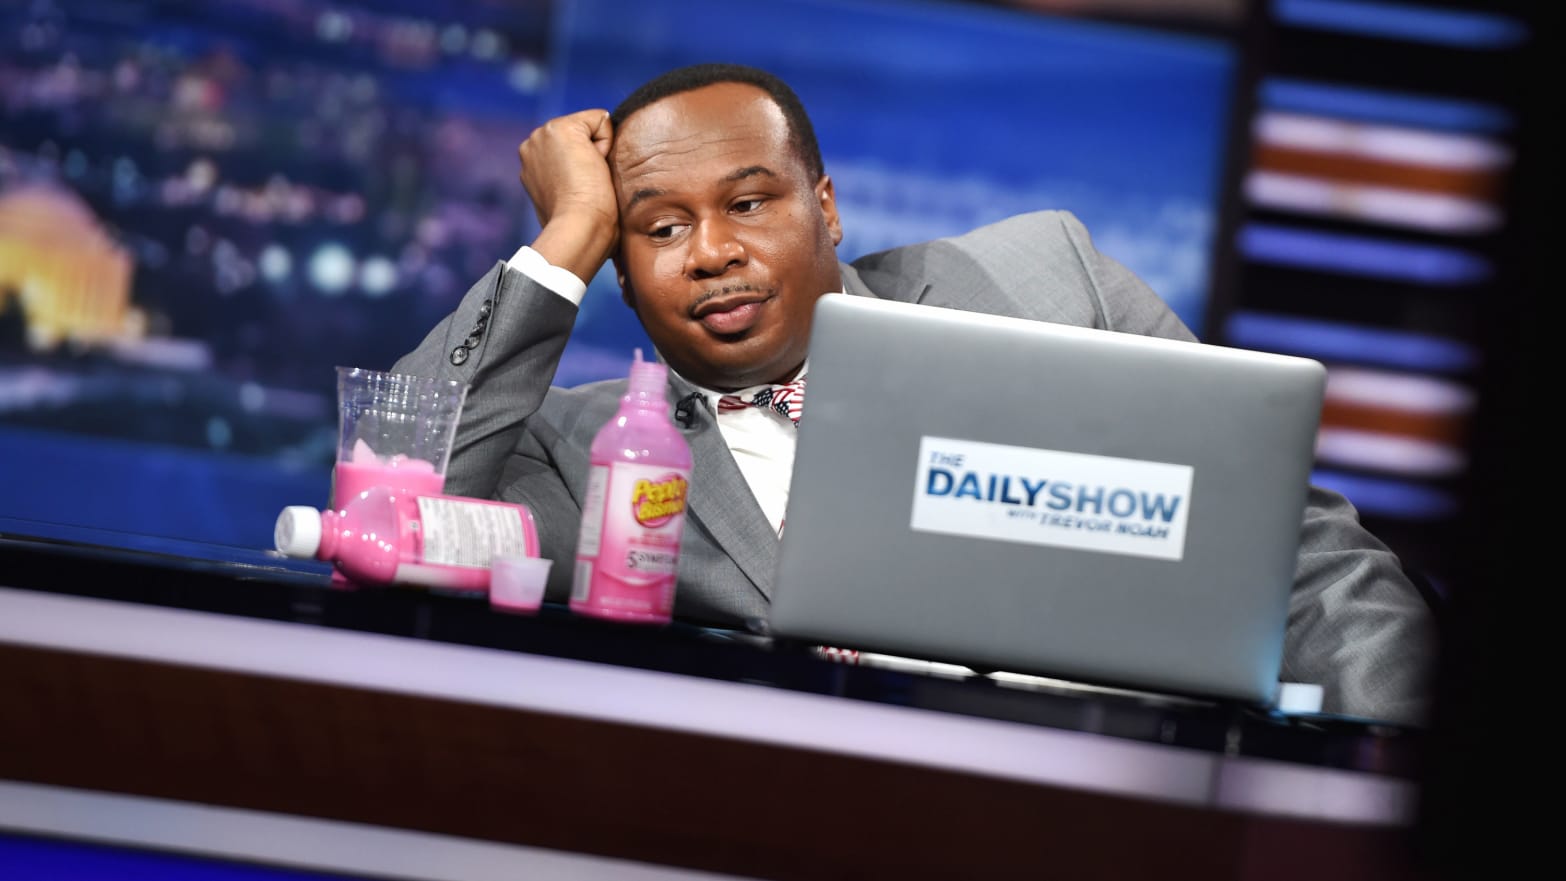 A photo including Correspondent Roy Wood Jr. on The Daily Show with Trevor Noah